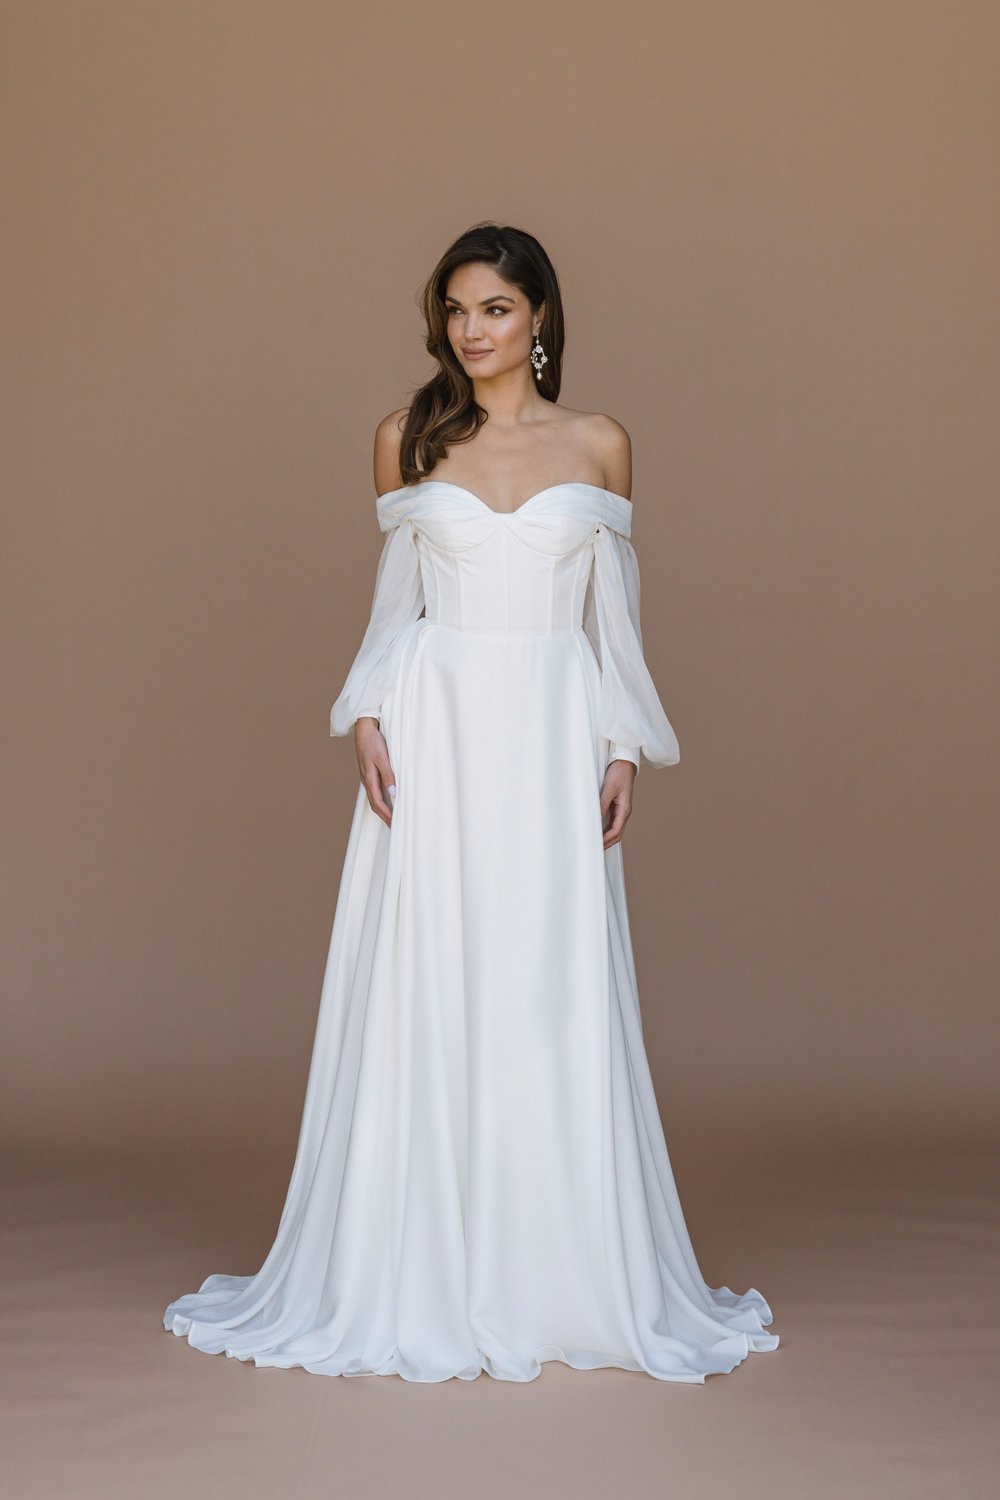 The Most Brilliant Bridal Trends for 2023 -Big sleeves on wedding gowns